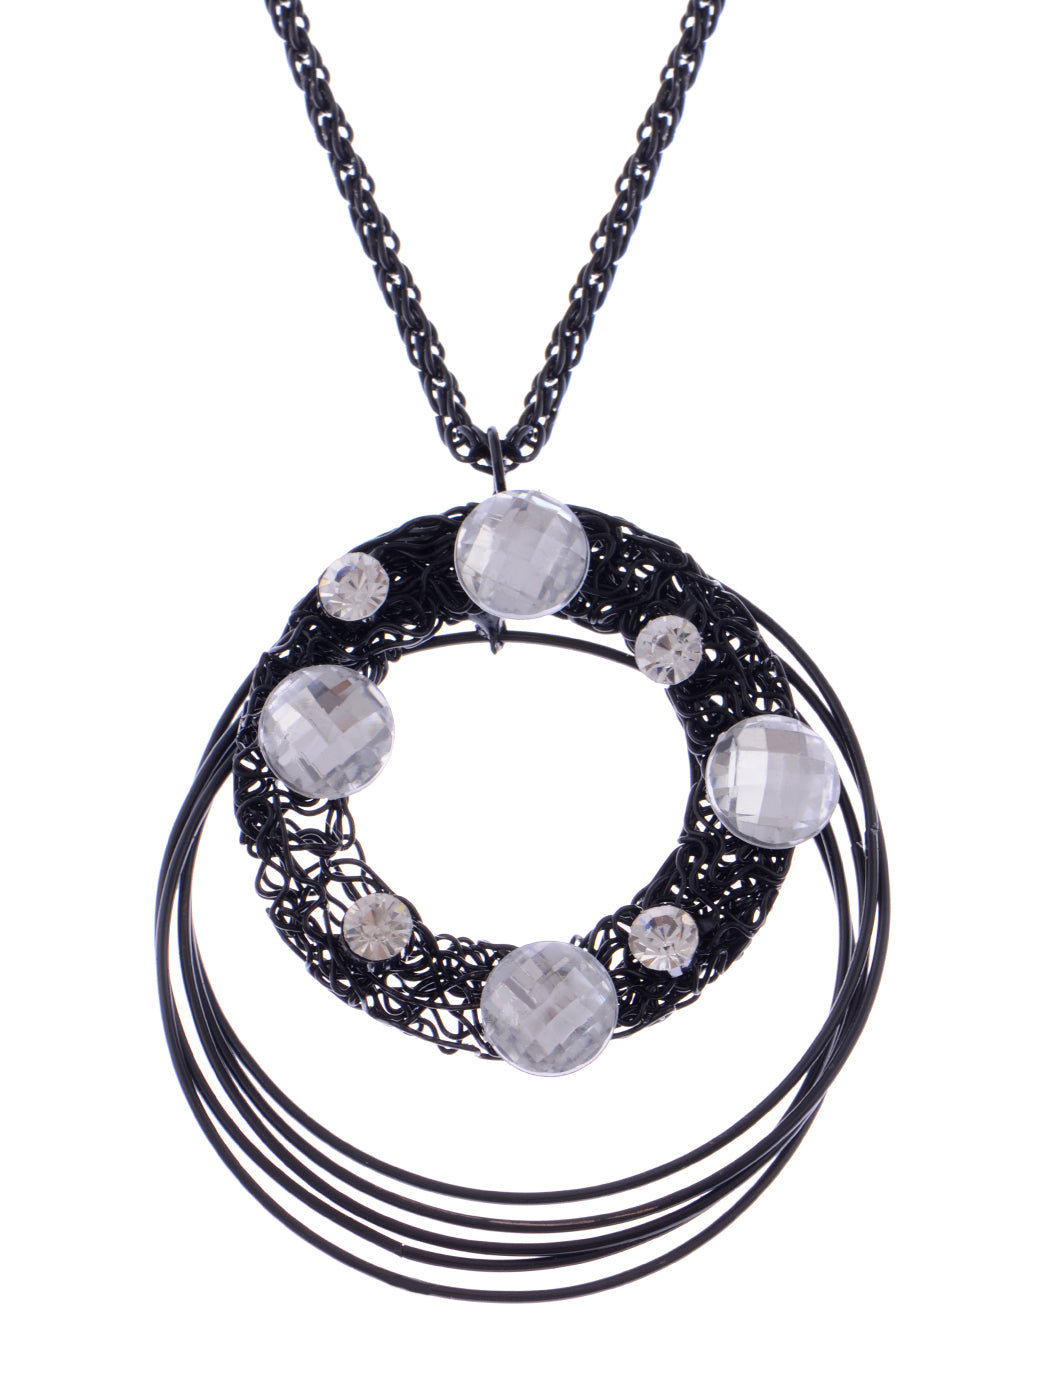 Black Chain Circle Round Wreath Loop Jewelry Necklace